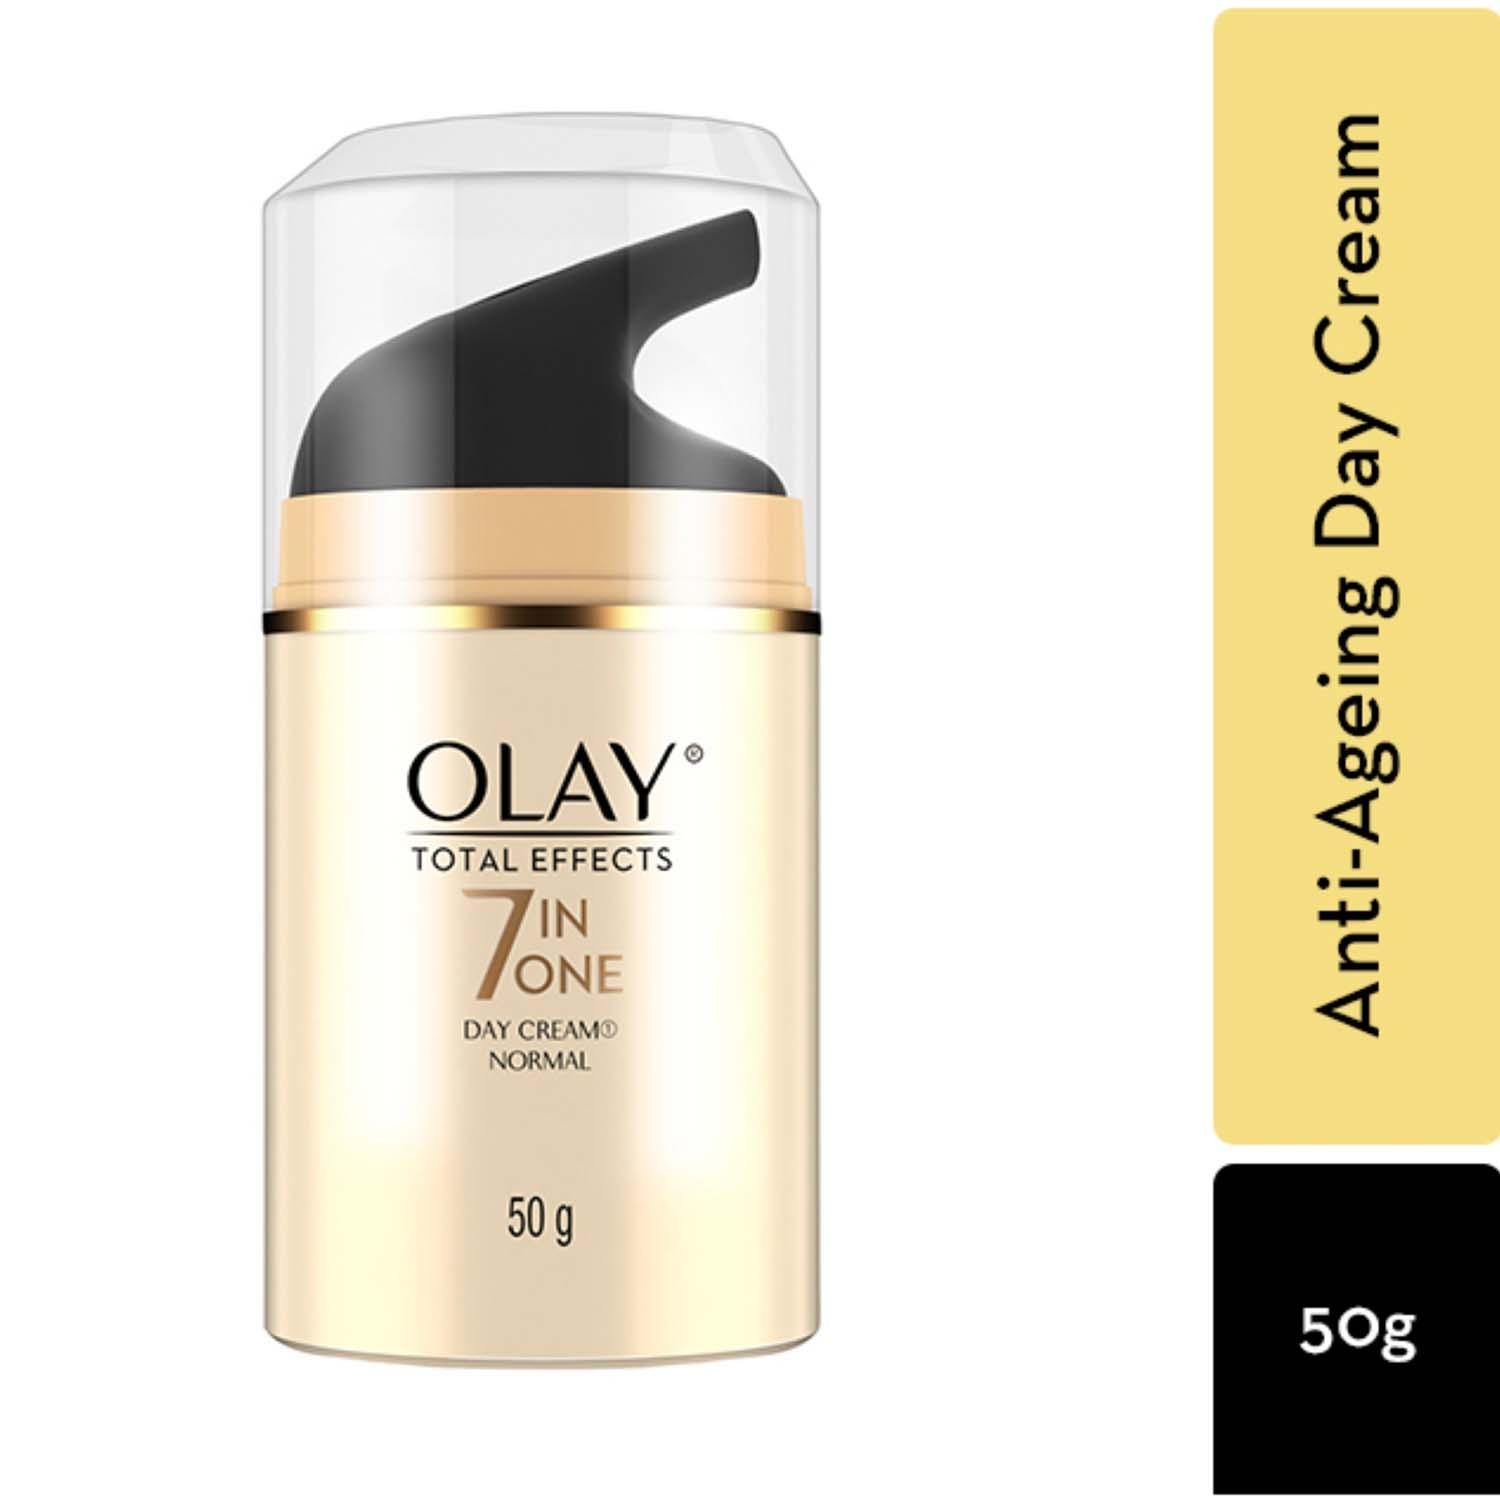 olay-7-in-1-total-effects-anti-ageing-day-cream-non-spf-(50g)